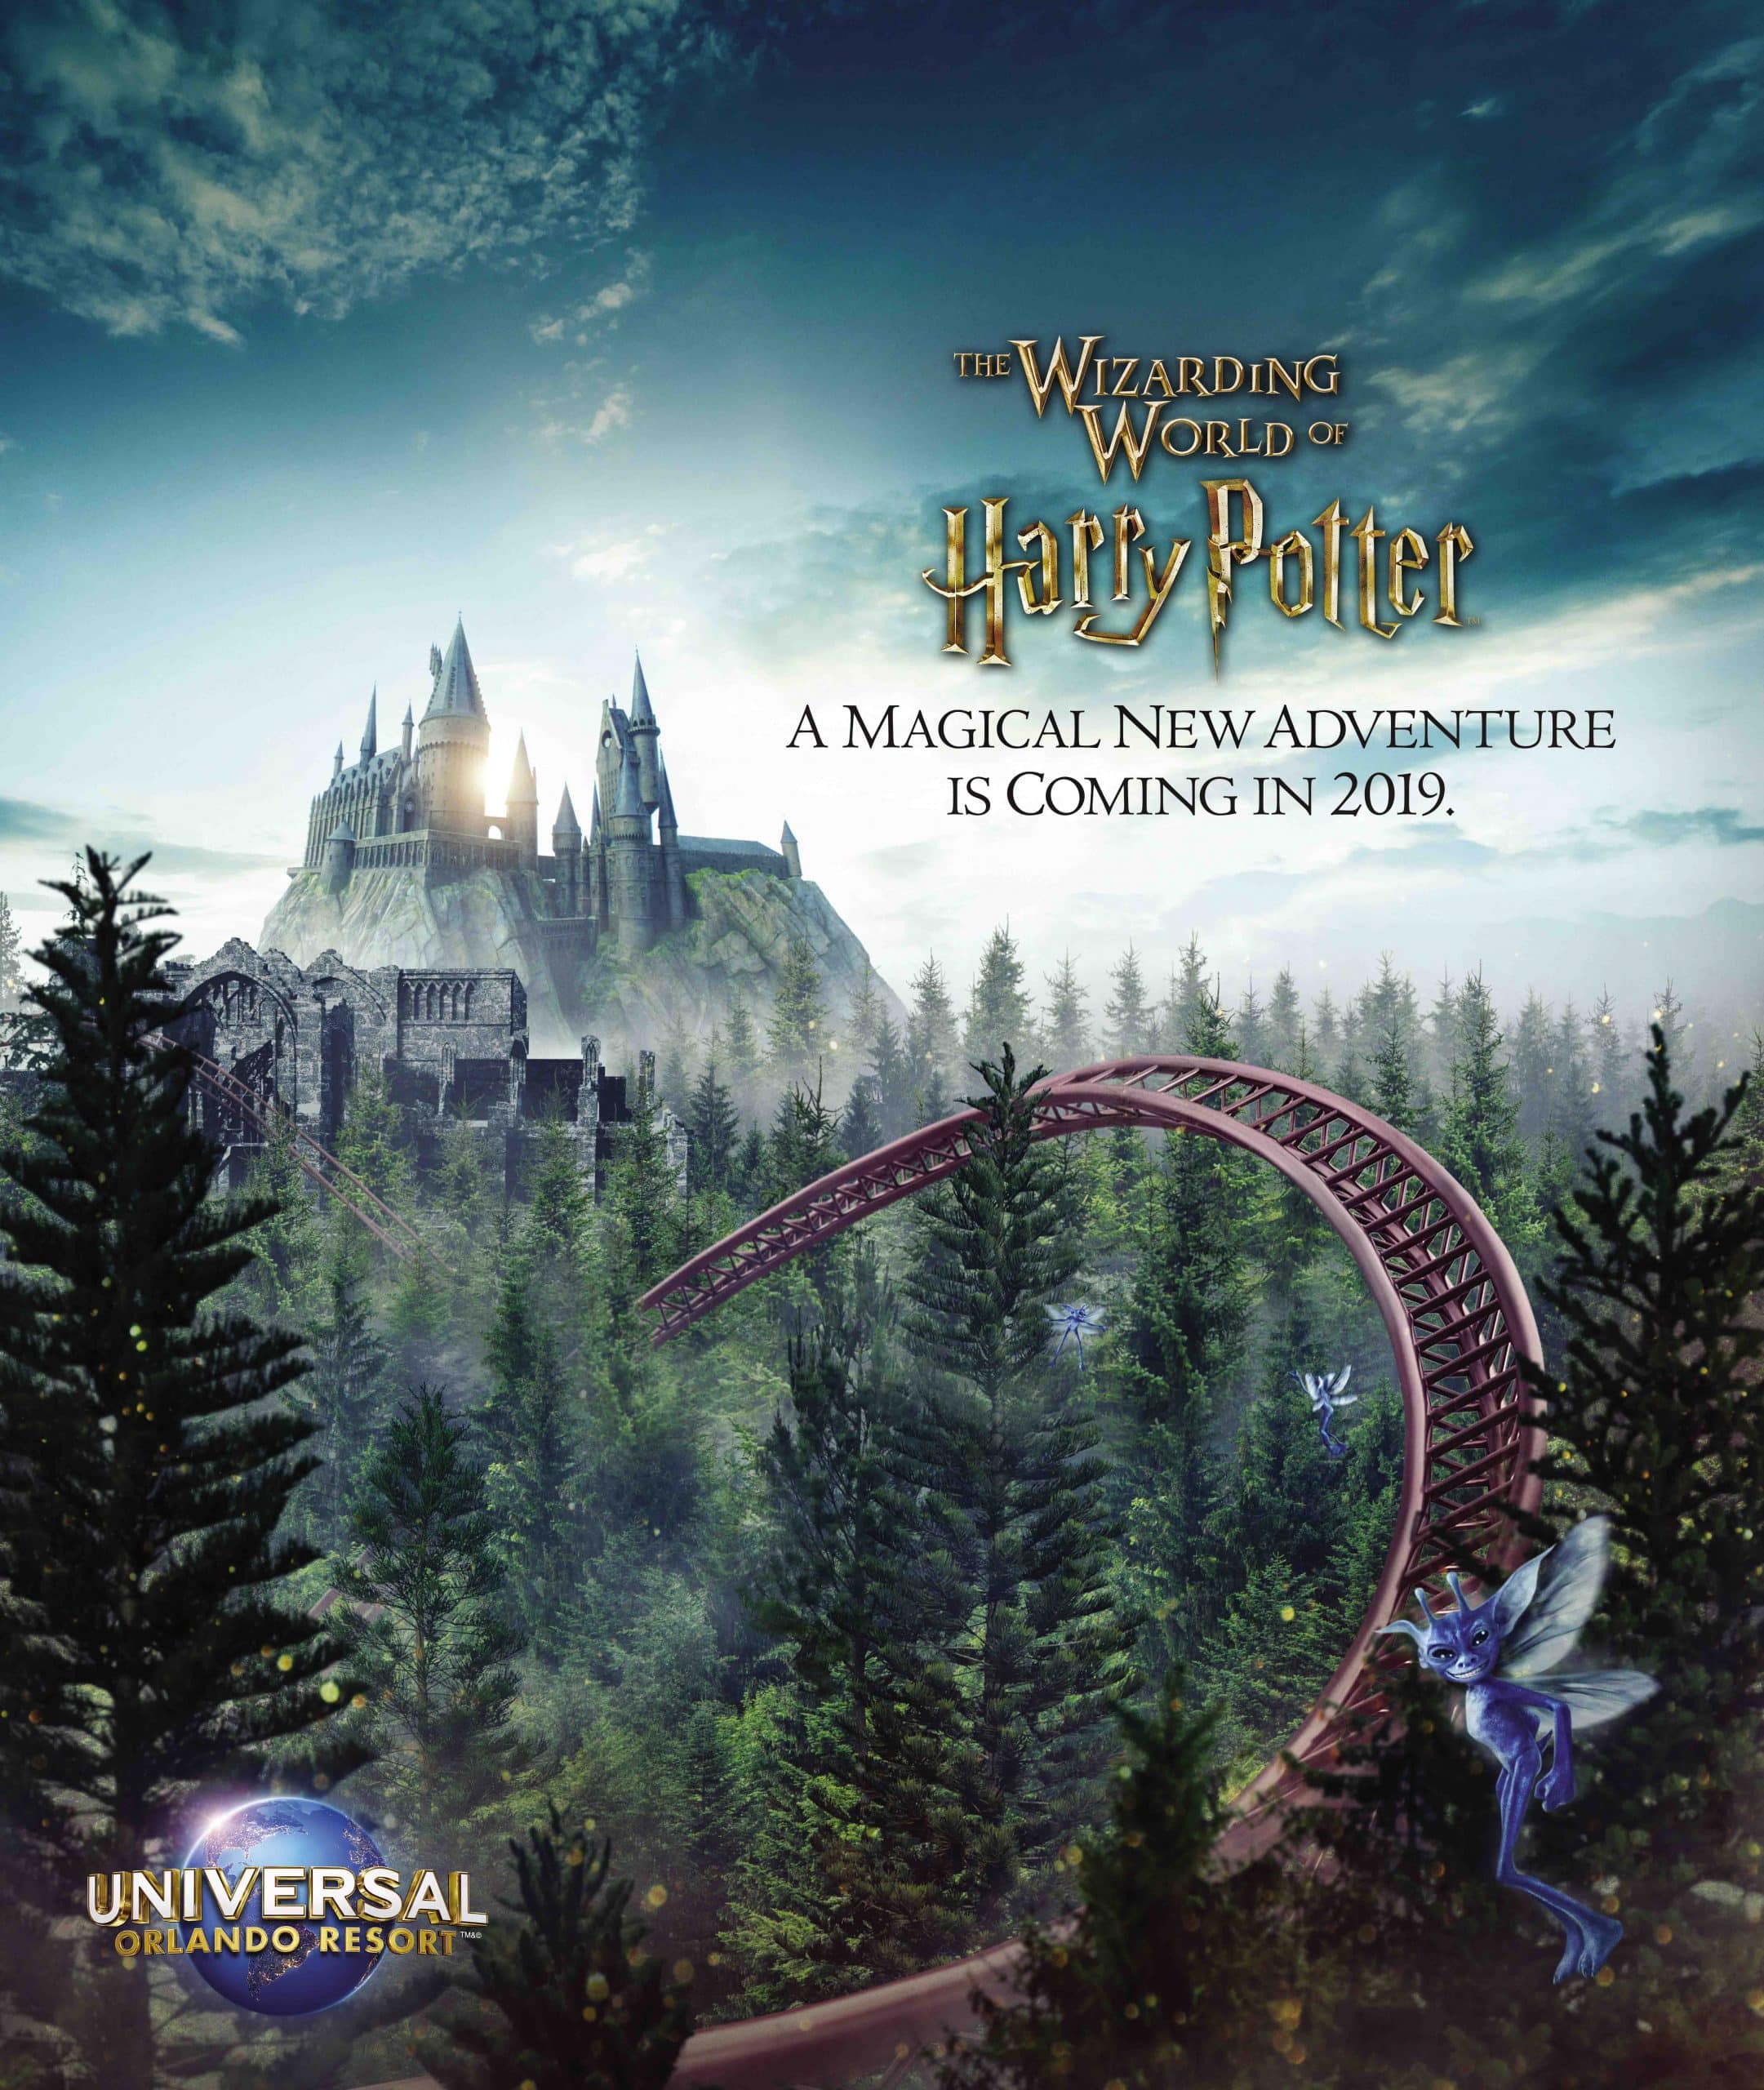 First look at Universal Orlandoâs new Wizarding World of Harry Potter ...